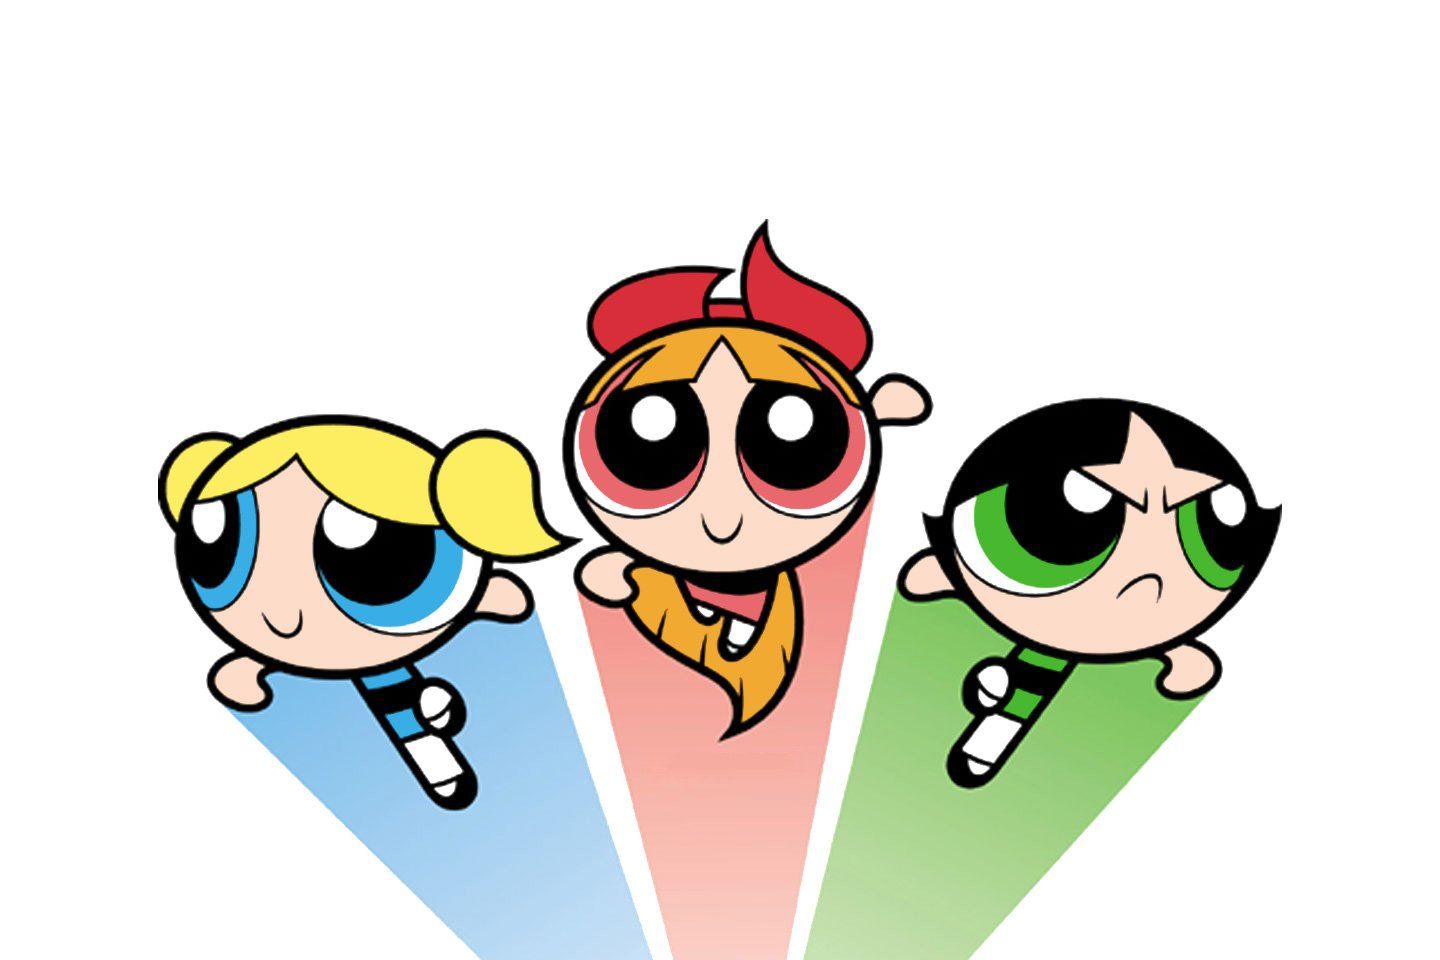 Free download 19 The Powerpuff Girls HD Wallpaper Background Image [1440x960] for your Desktop, Mobile & Tablet. Explore The Powerpuff Girls HD Wallpaper. The Powerpuff Girls HD Wallpaper, The